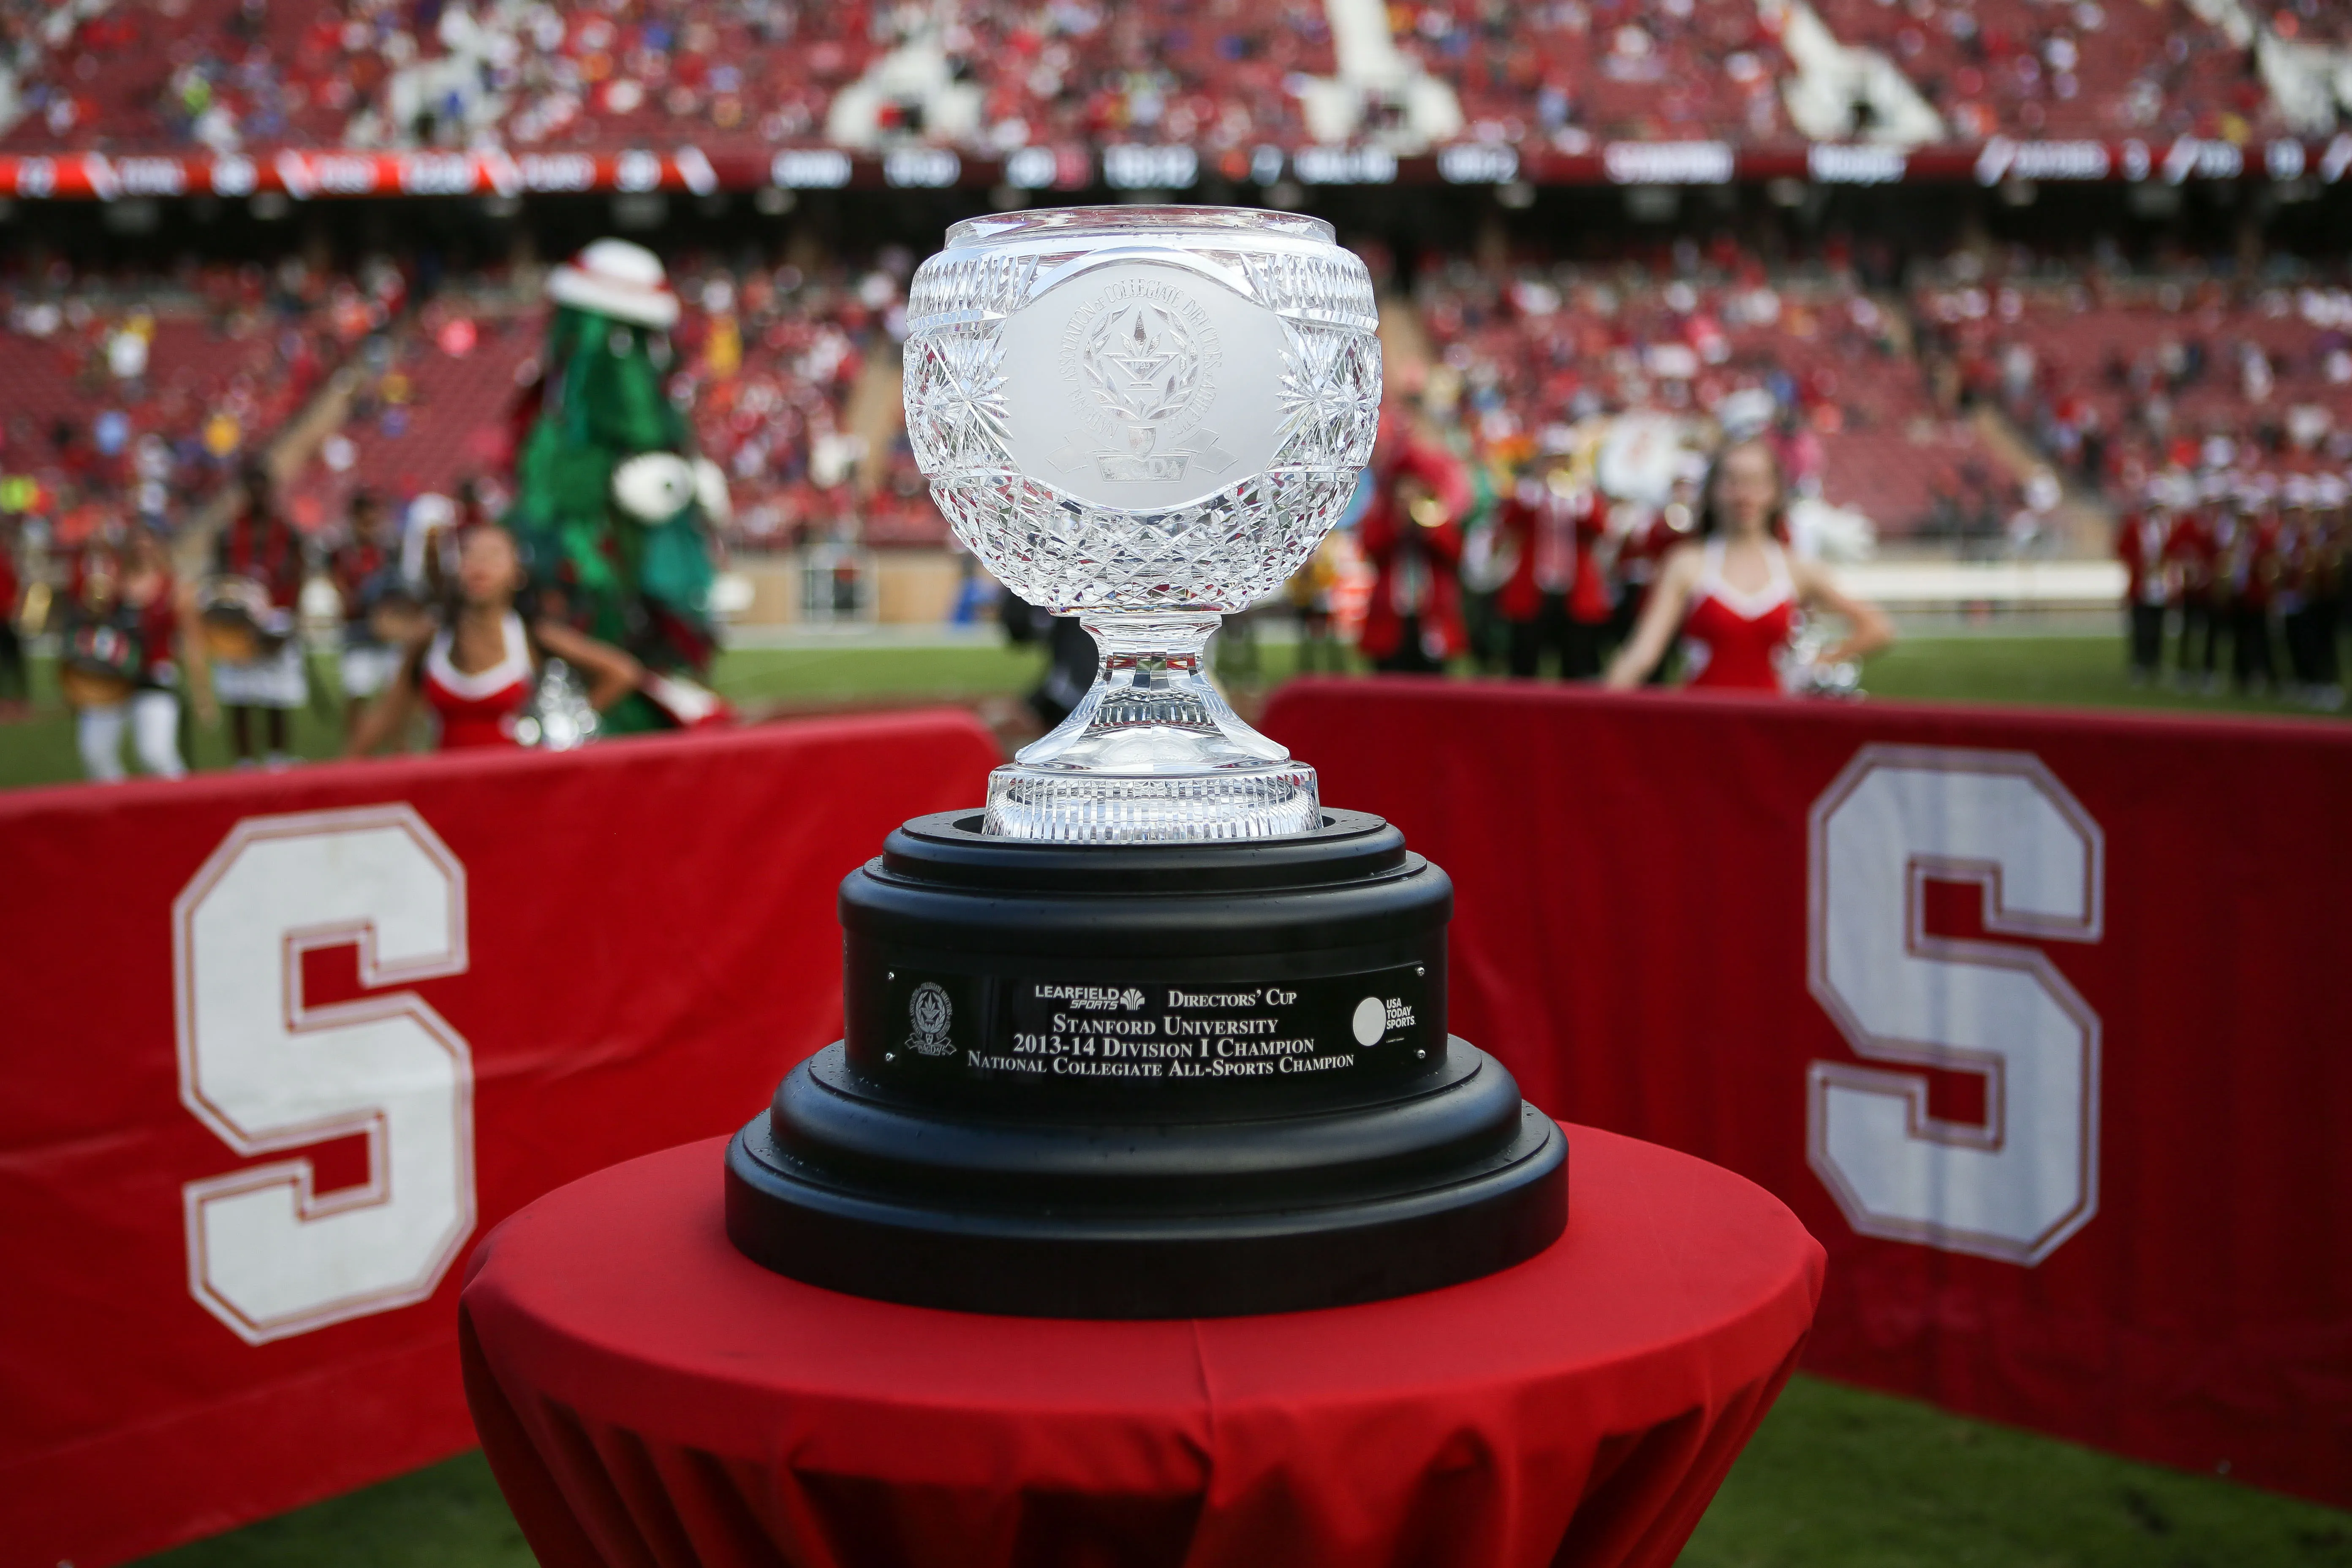 Stanford finishes second in 202122 Directors' Cup